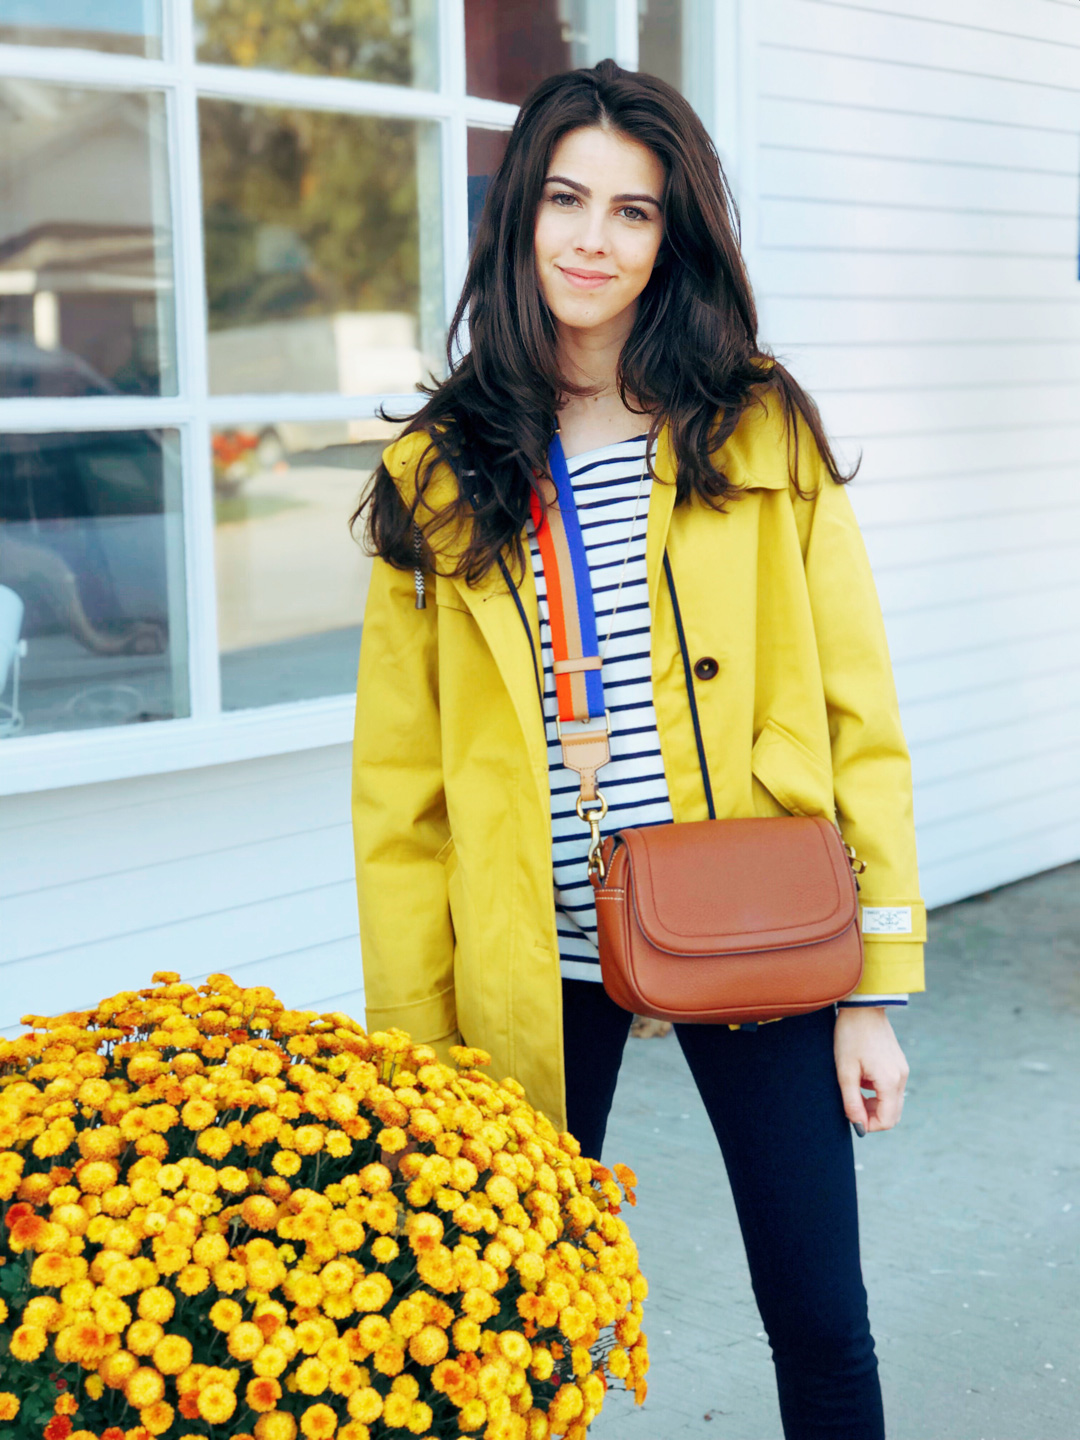 Jackie Roque styling a yellow raincoat in Manchester Vermont.